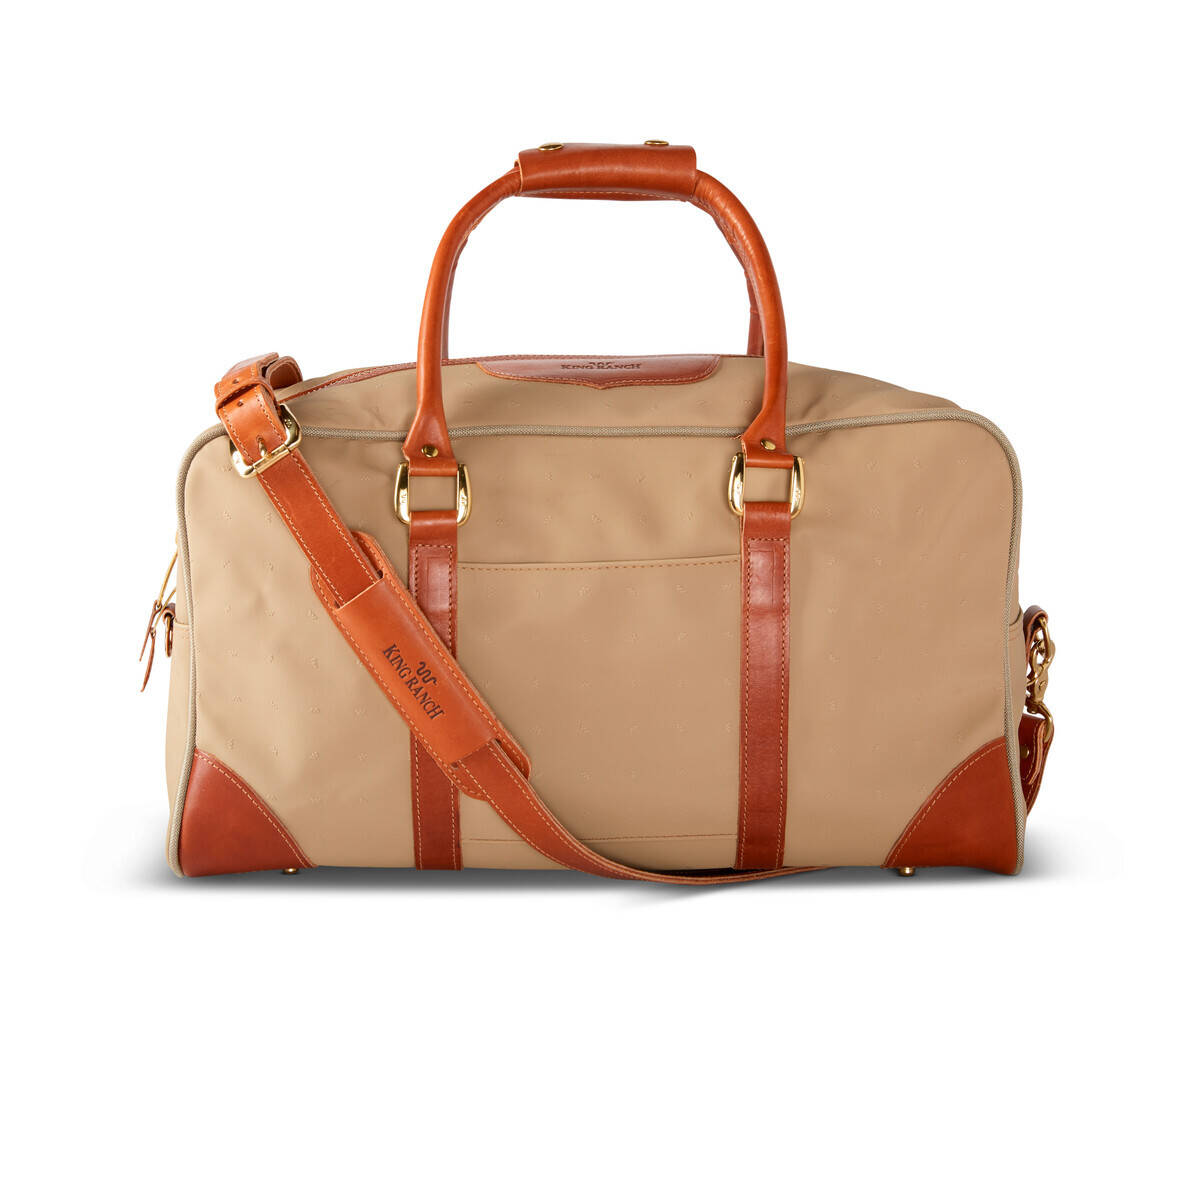 CANVAS ARMSTRONG CARRY-ON